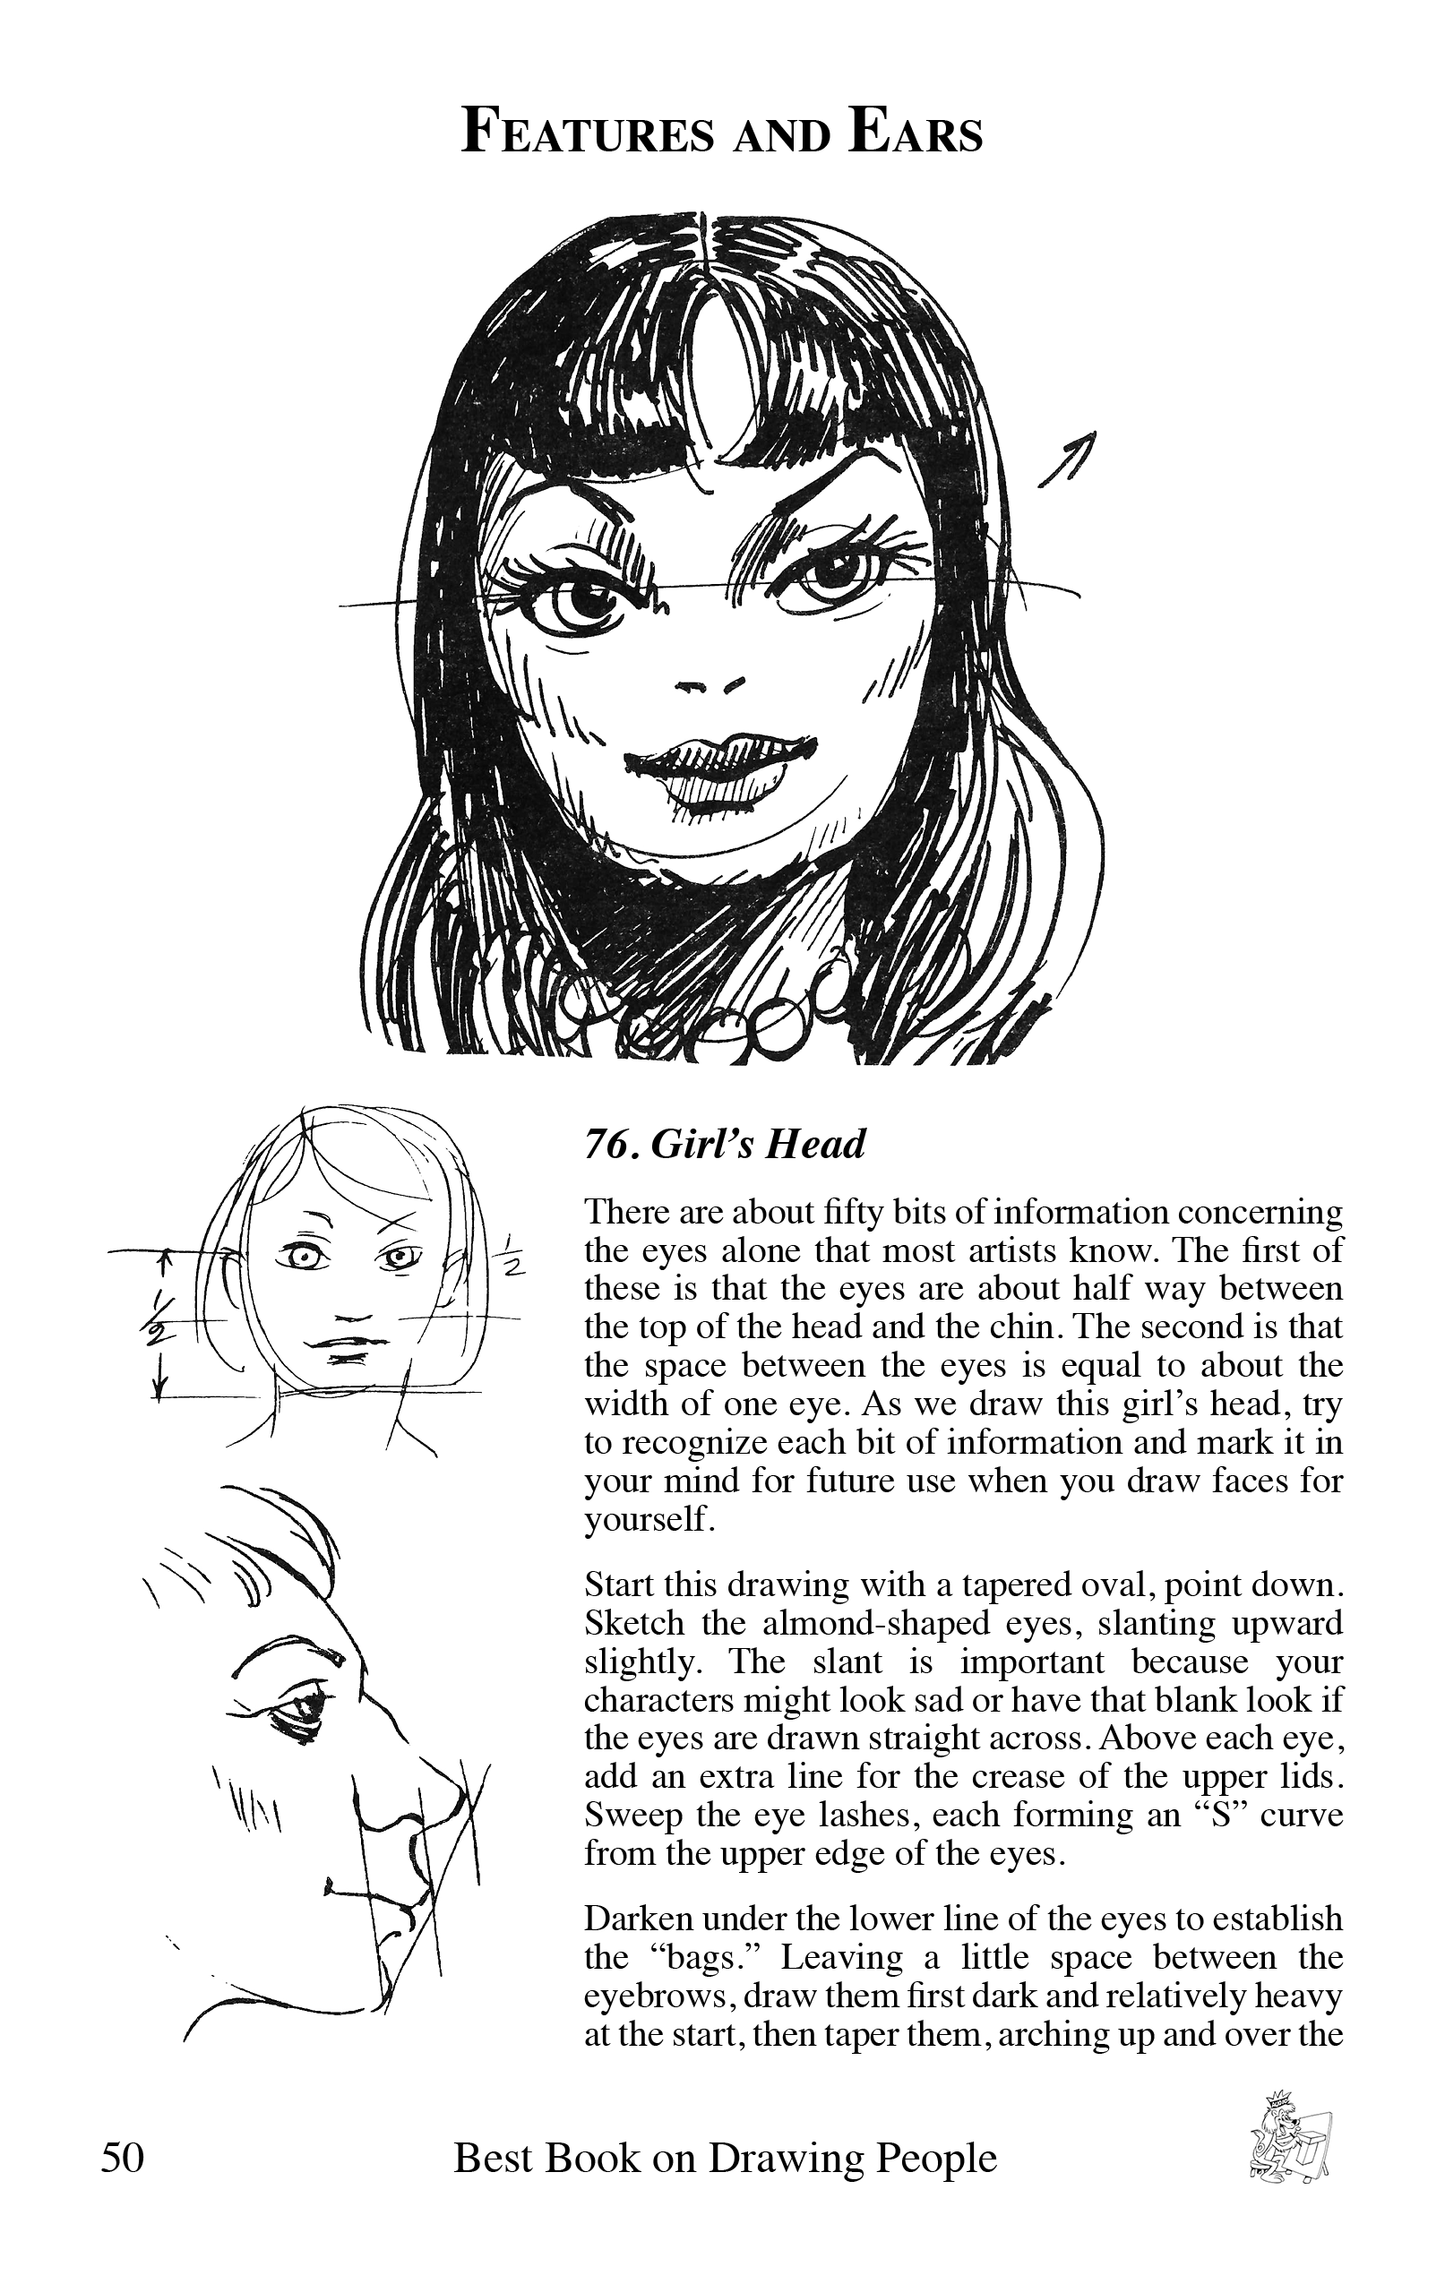 Features and Ears sample page from the book Best Book on Drawing People by Bruce McIntyre